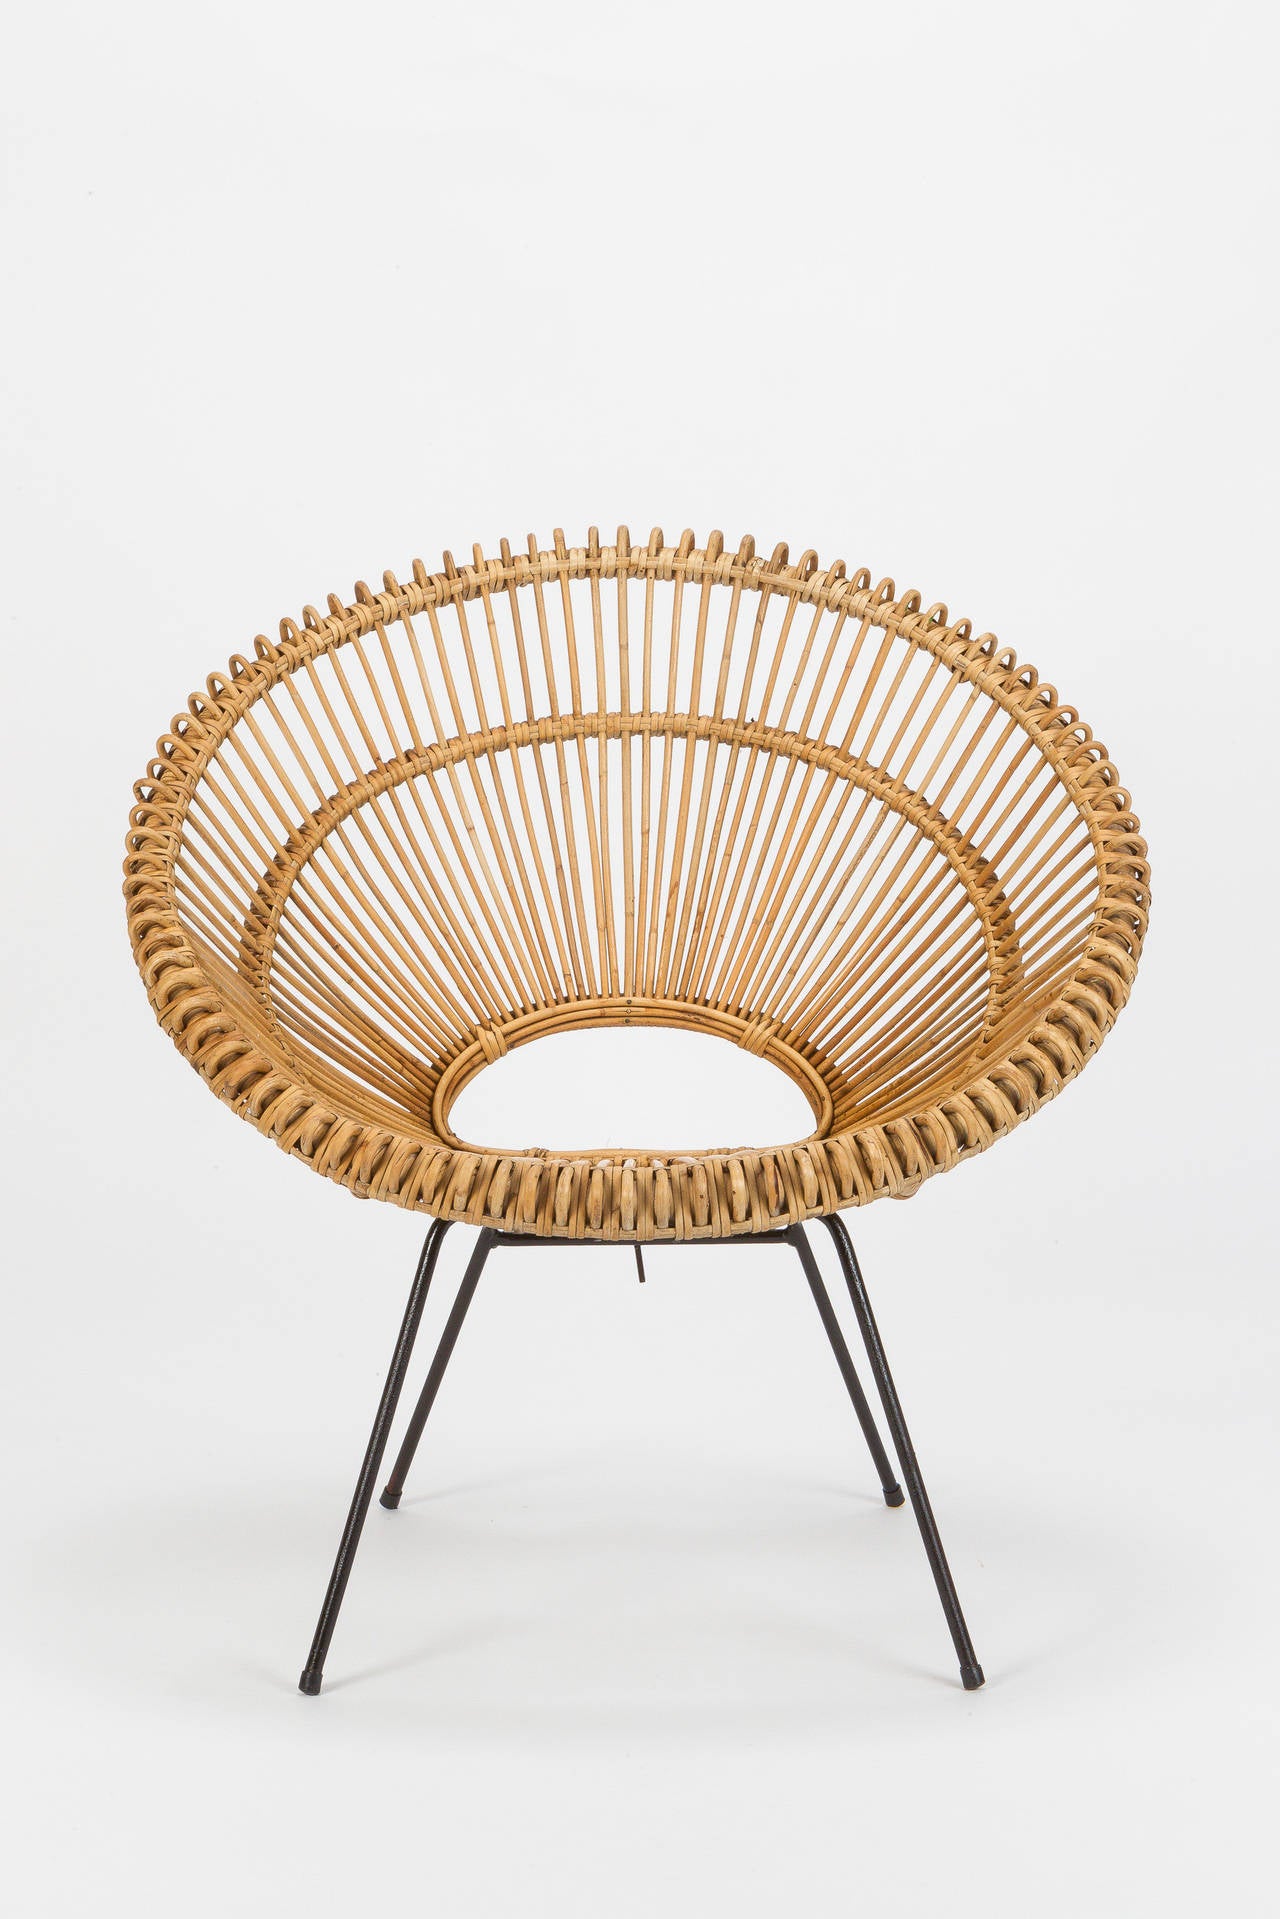 Beautiful wicker chair attributed to Janine Abraham & Dirk Jan Rol. Very nicely shaped and crafted of woven bamboo, the base is made of lacquered metal and can be removed for shipping